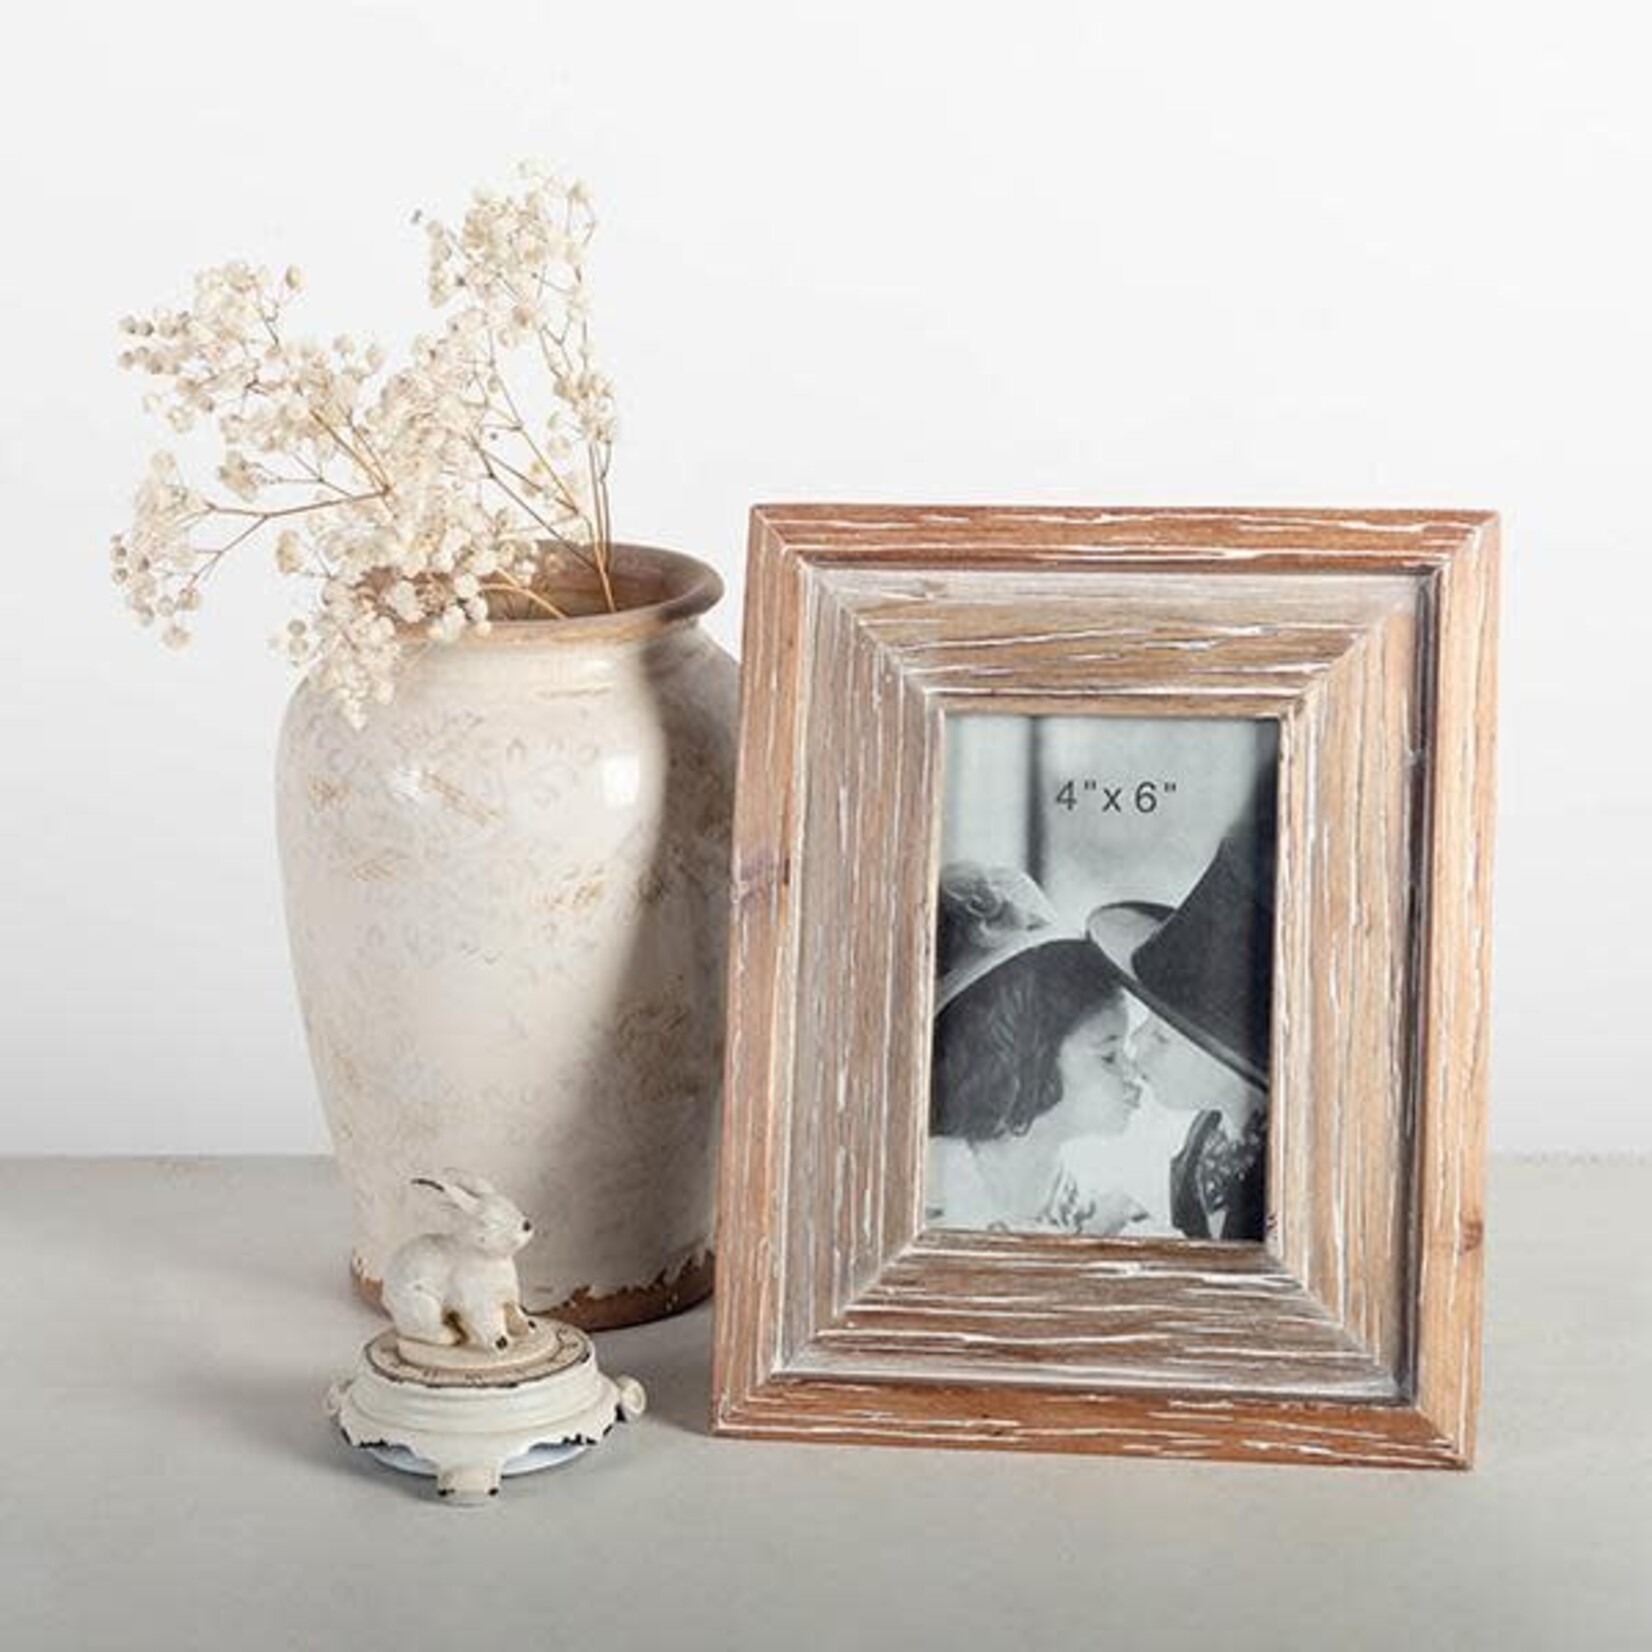 Forpost Trade Natural Wood Picture Frame - 4"x6"